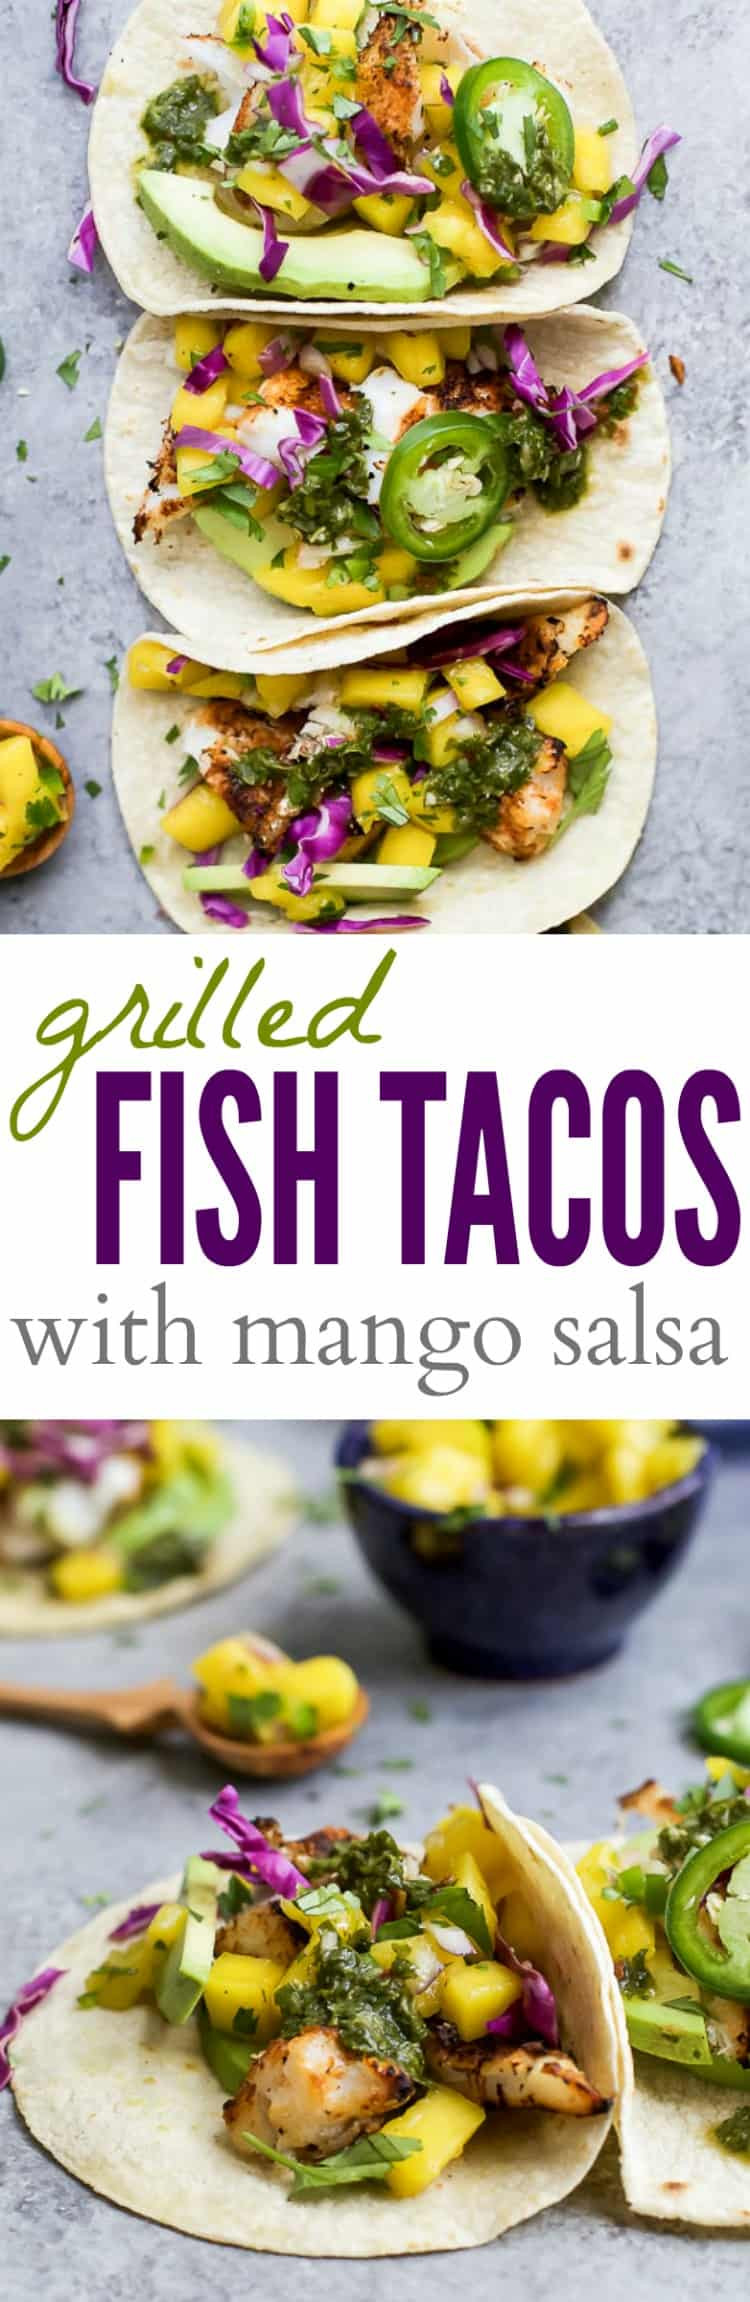 Easy Mango Salsa Recipe For Fish
 Grilled Fish Tacos with Mango Salsa